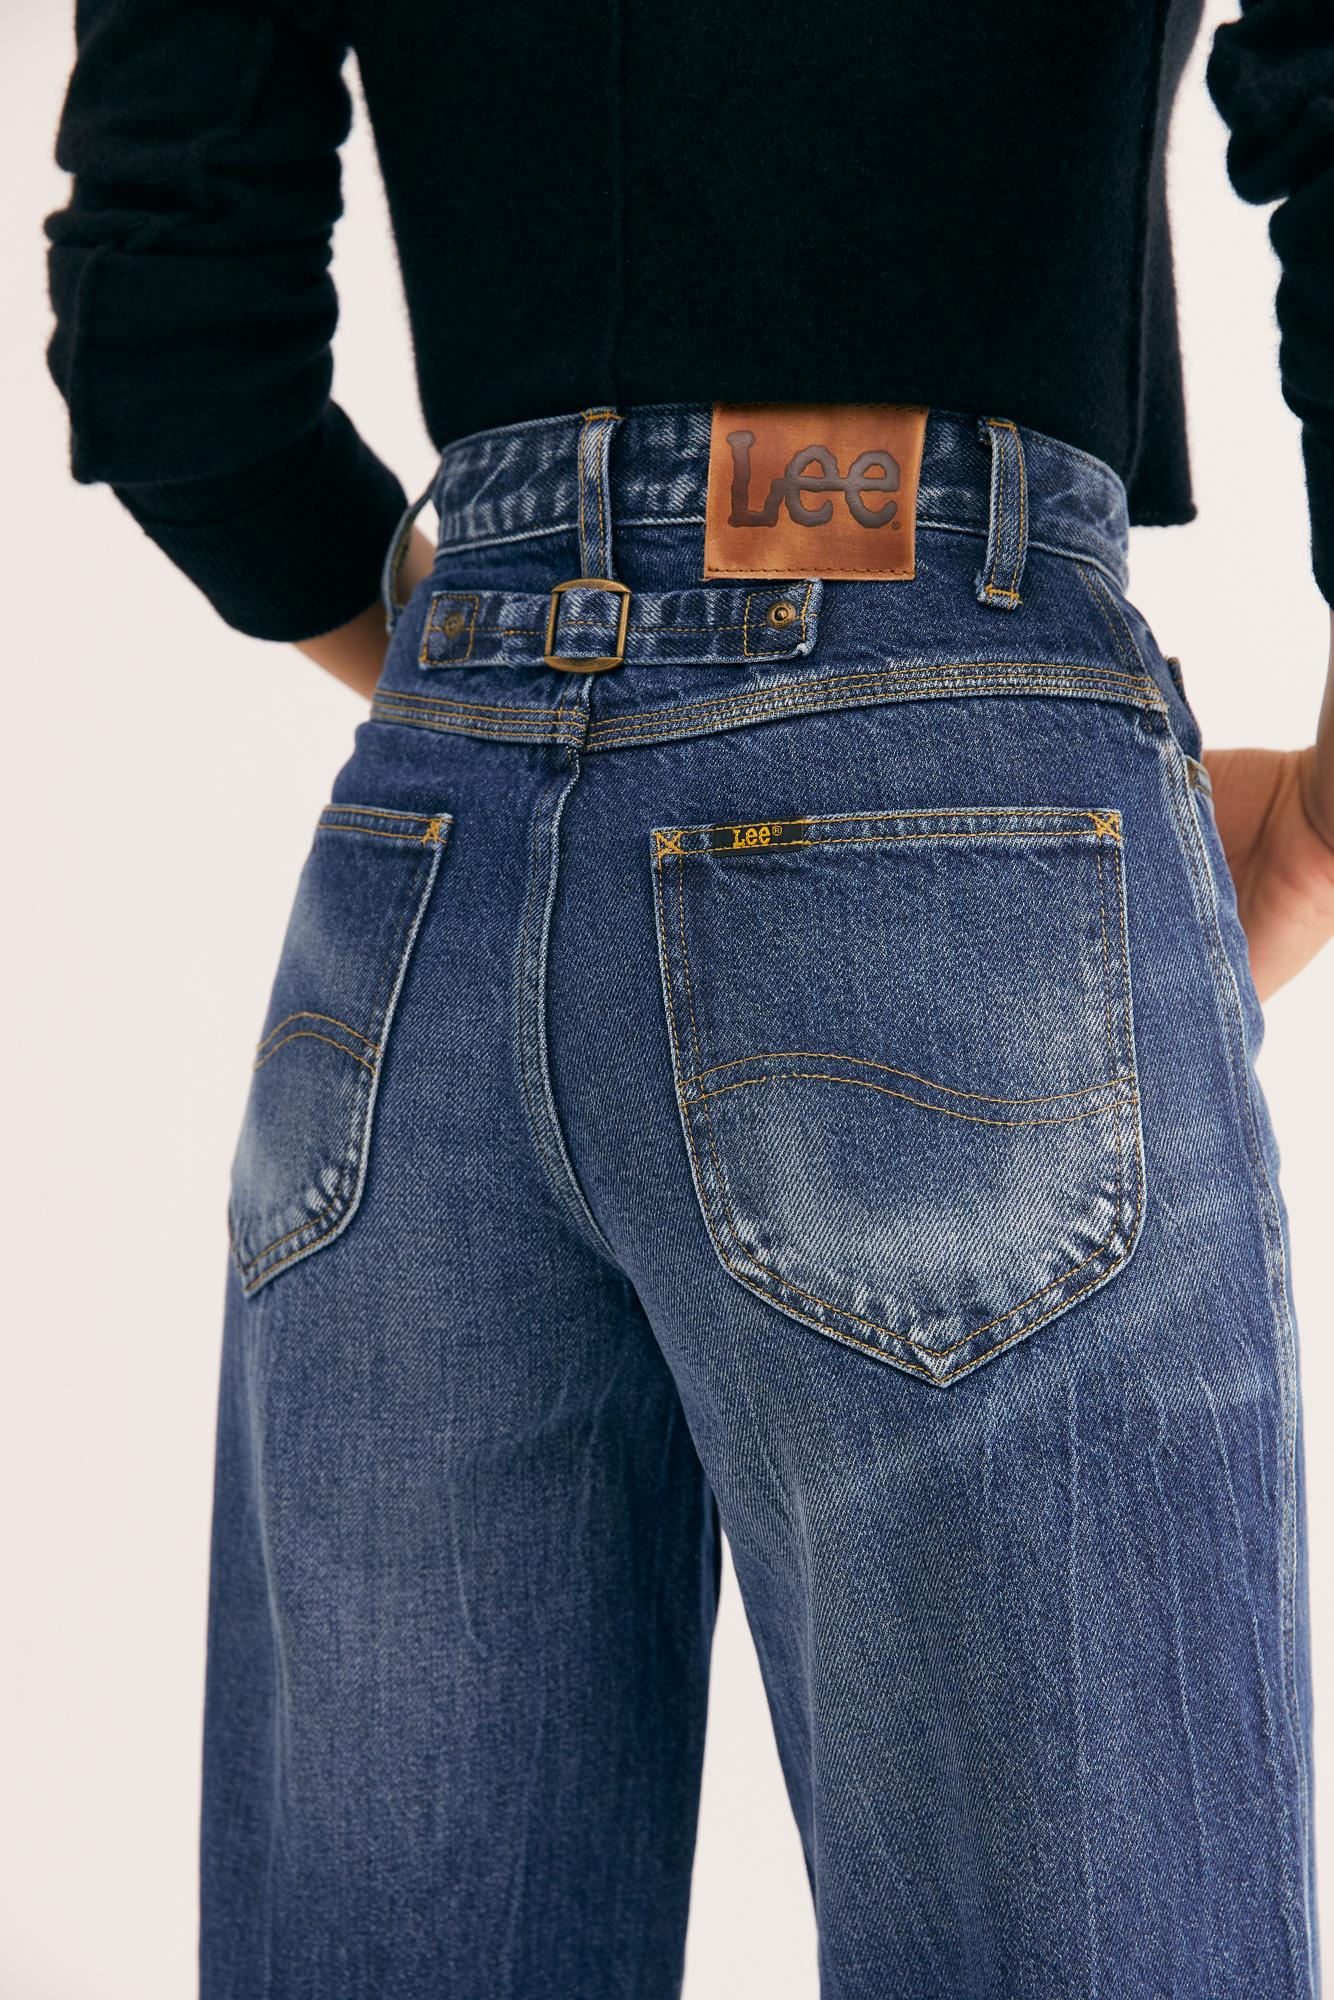 lee stovepipe jeans